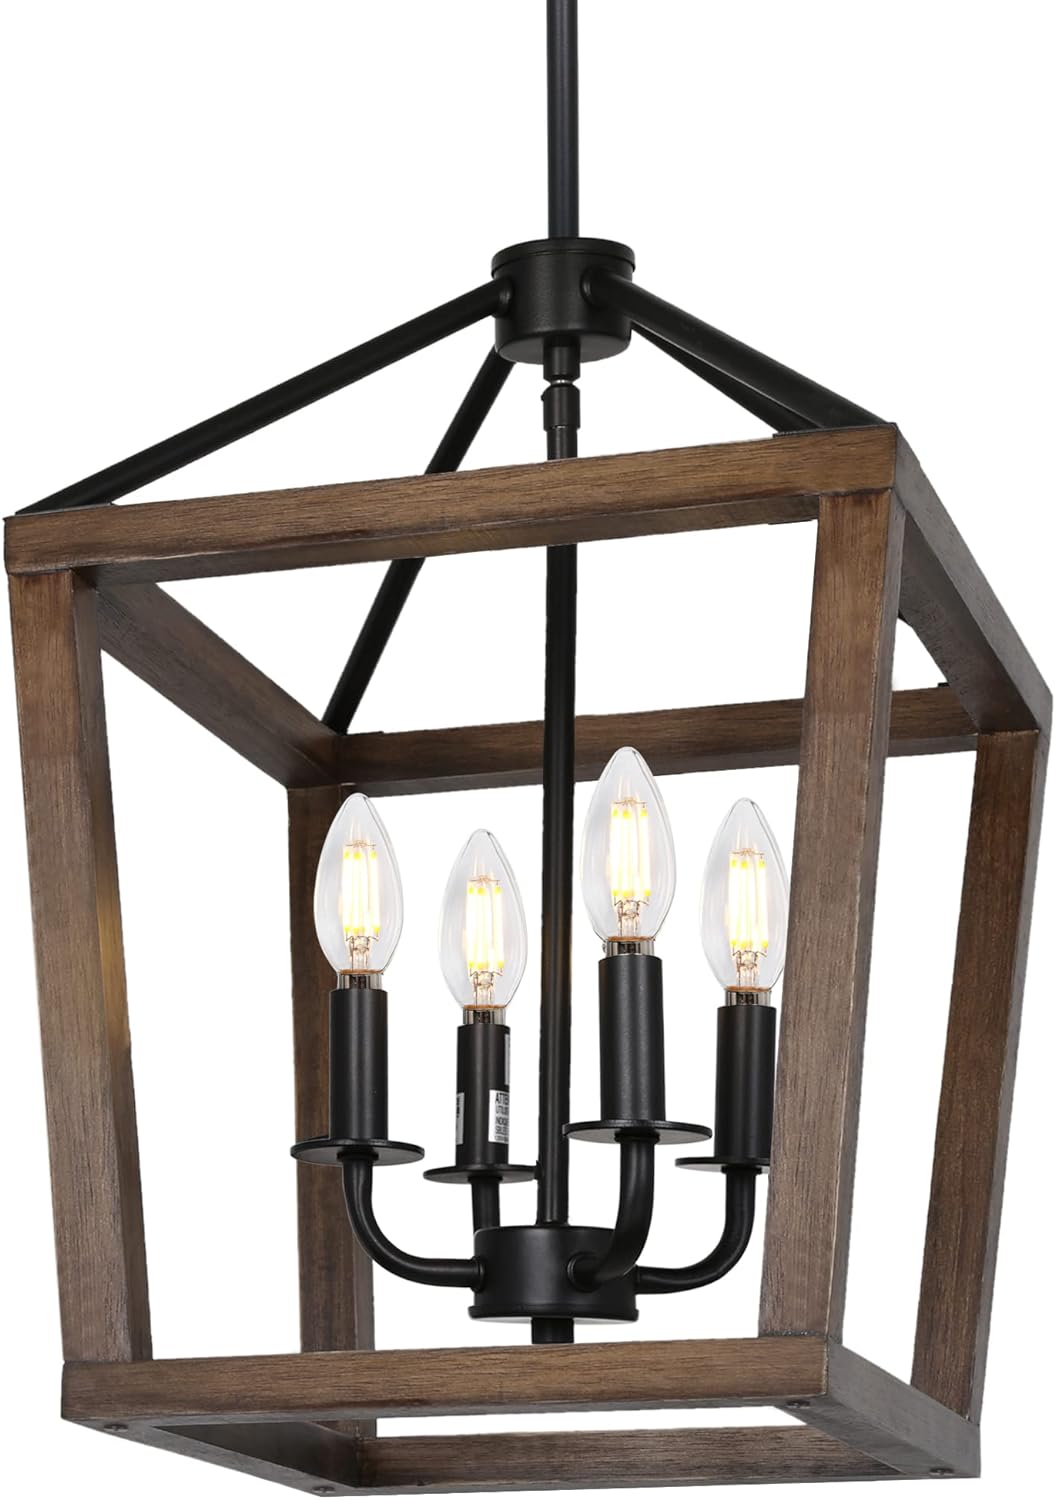 Hykolity 4-Light Rustic Chandelier, Classic Lantern Pendant Light with Oak Wood and Iron Finish, Farmhouse Lighting Fixtures for Dining